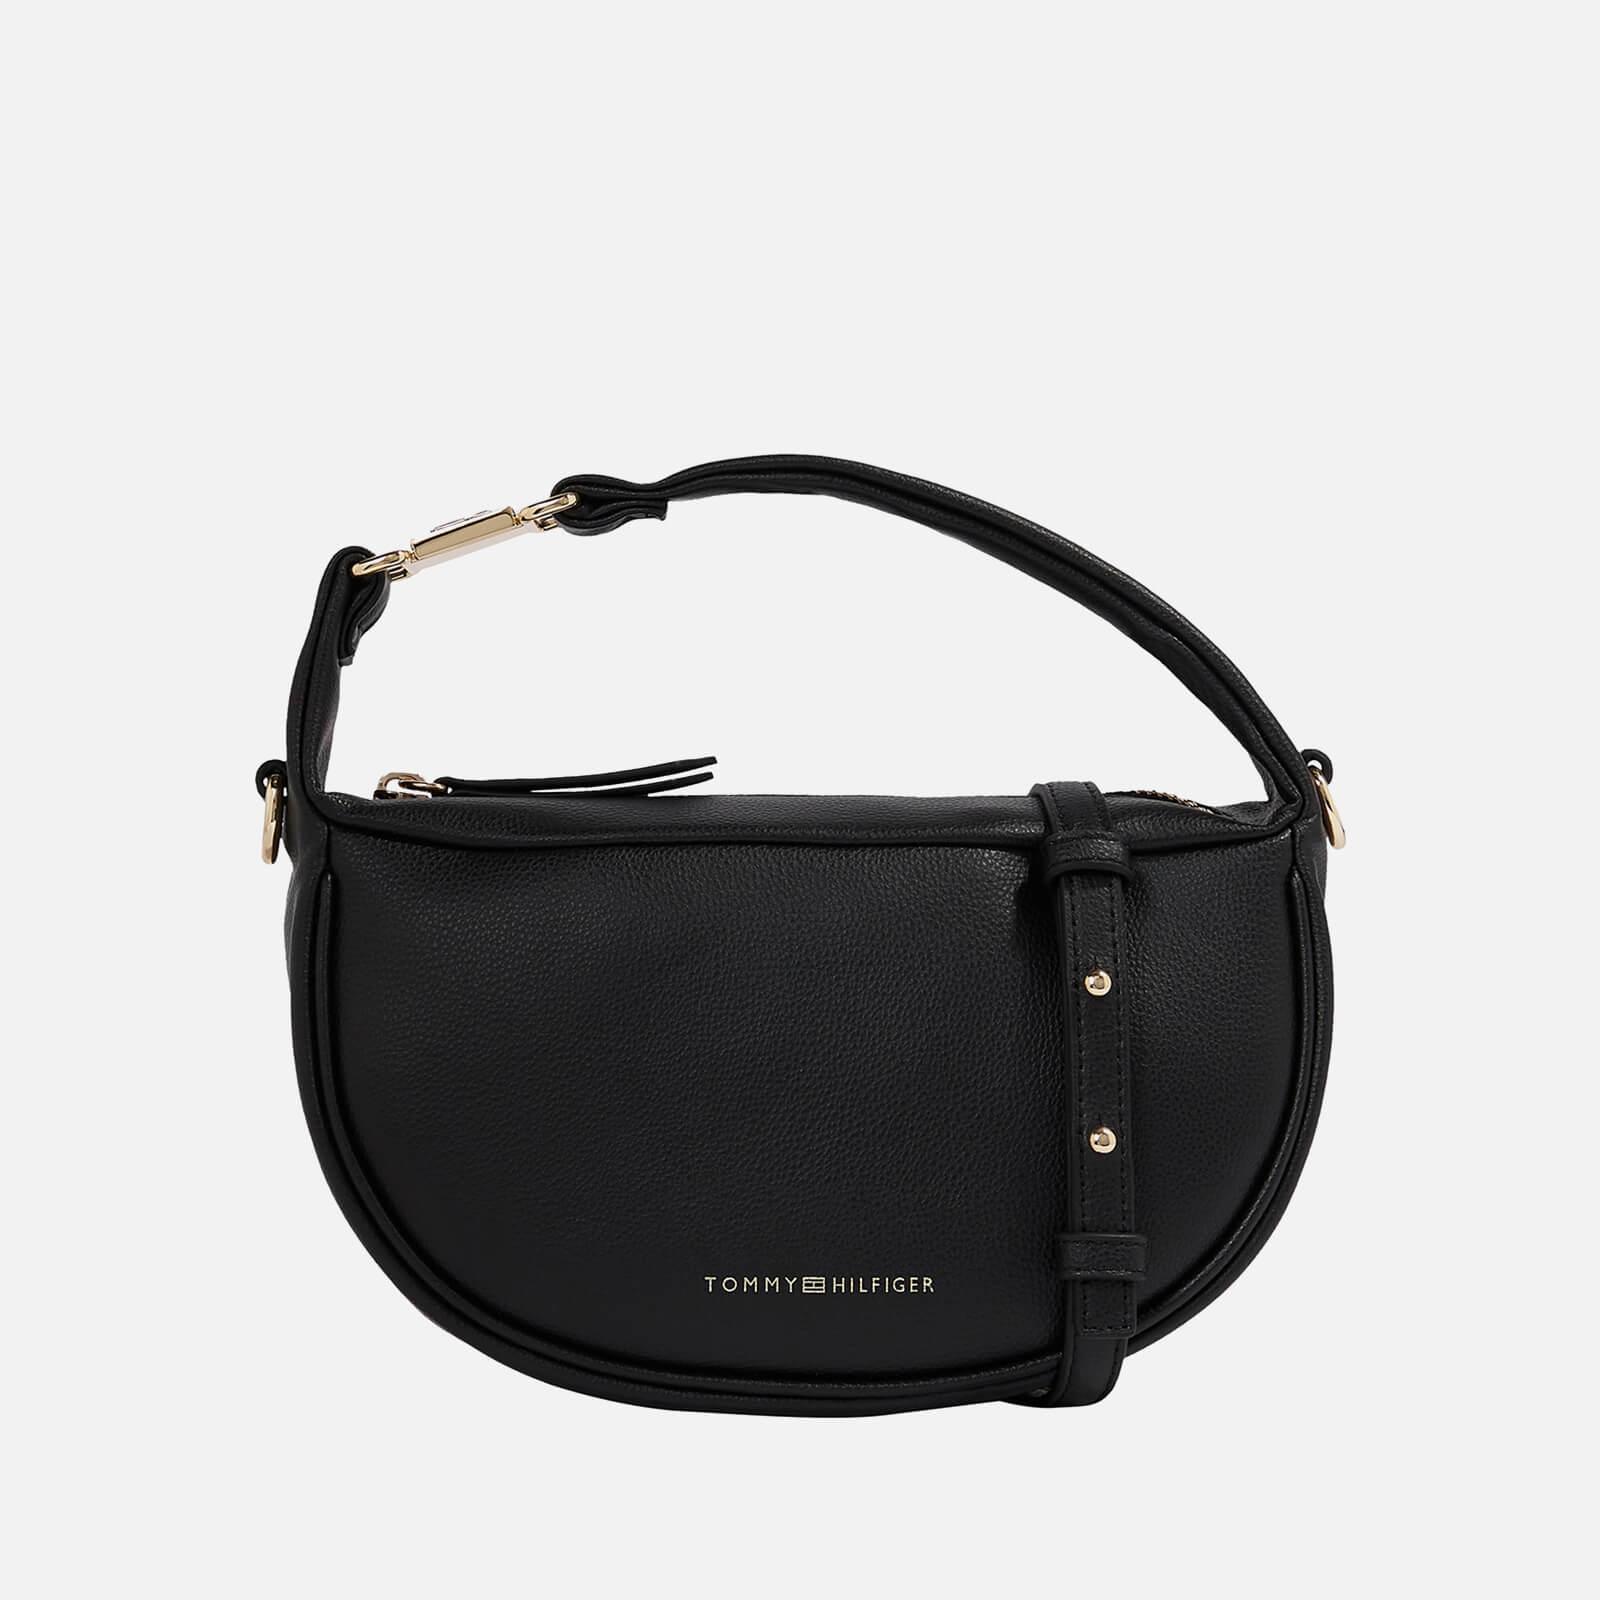 Tommy Hilfiger Contemporary Faux Leather Crossbody Bag in Black | Lyst